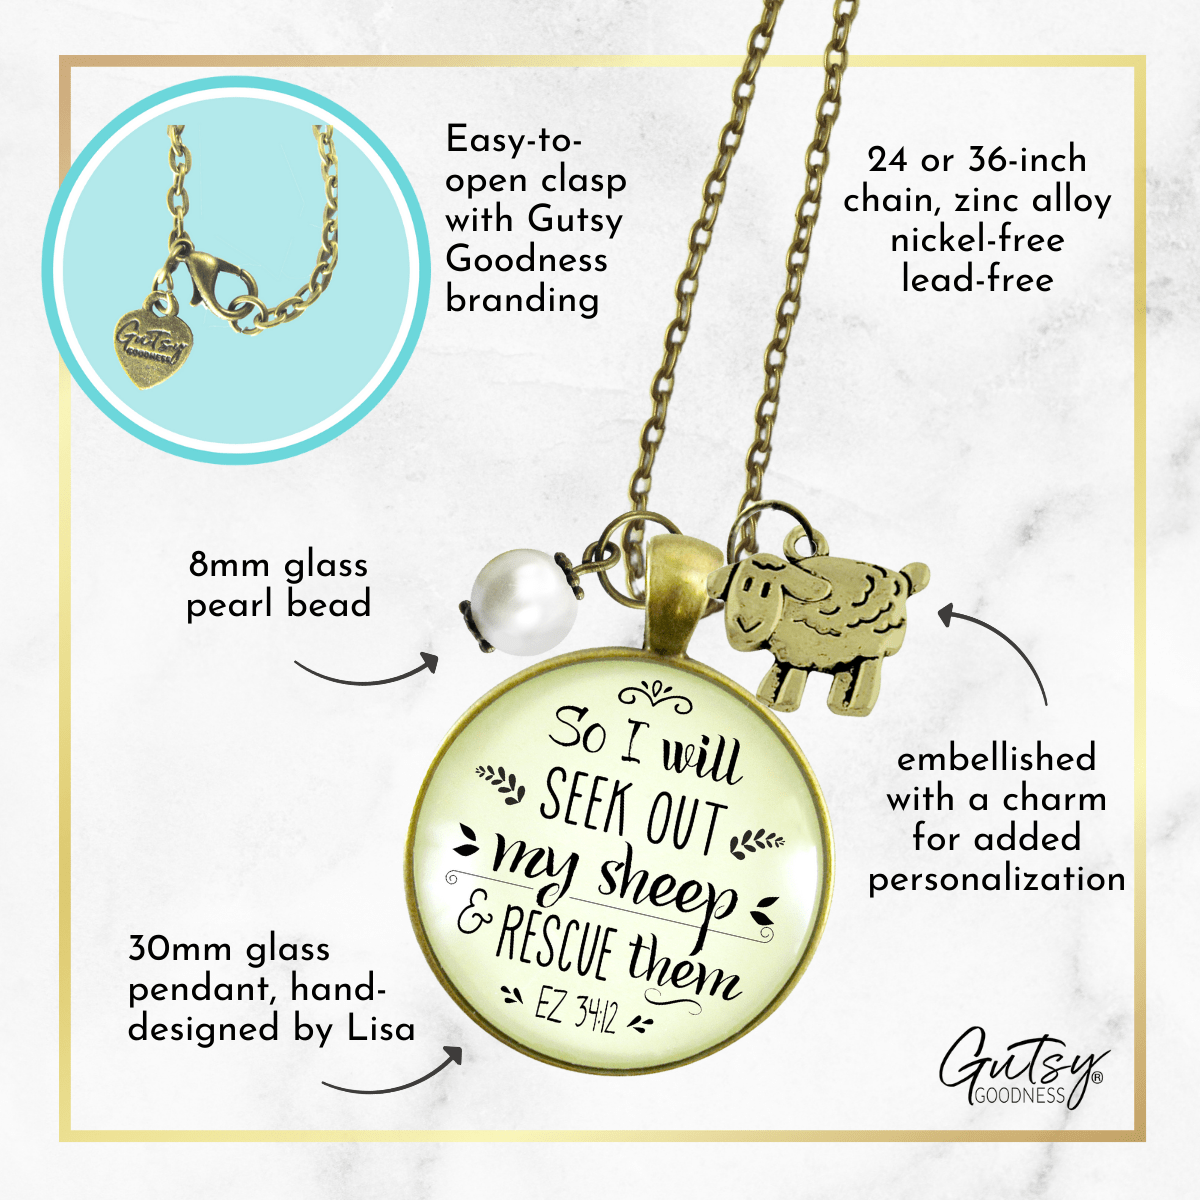 Gutsy Goodness Christian Necklace So I Will Seek Out My Sheep Jewelry Lamb Charm - Gutsy Goodness;Christian Necklace So I Will Seek Out My Sheep Jewelry Lamb Charm - Gutsy Goodness Handmade Jewelry Gifts